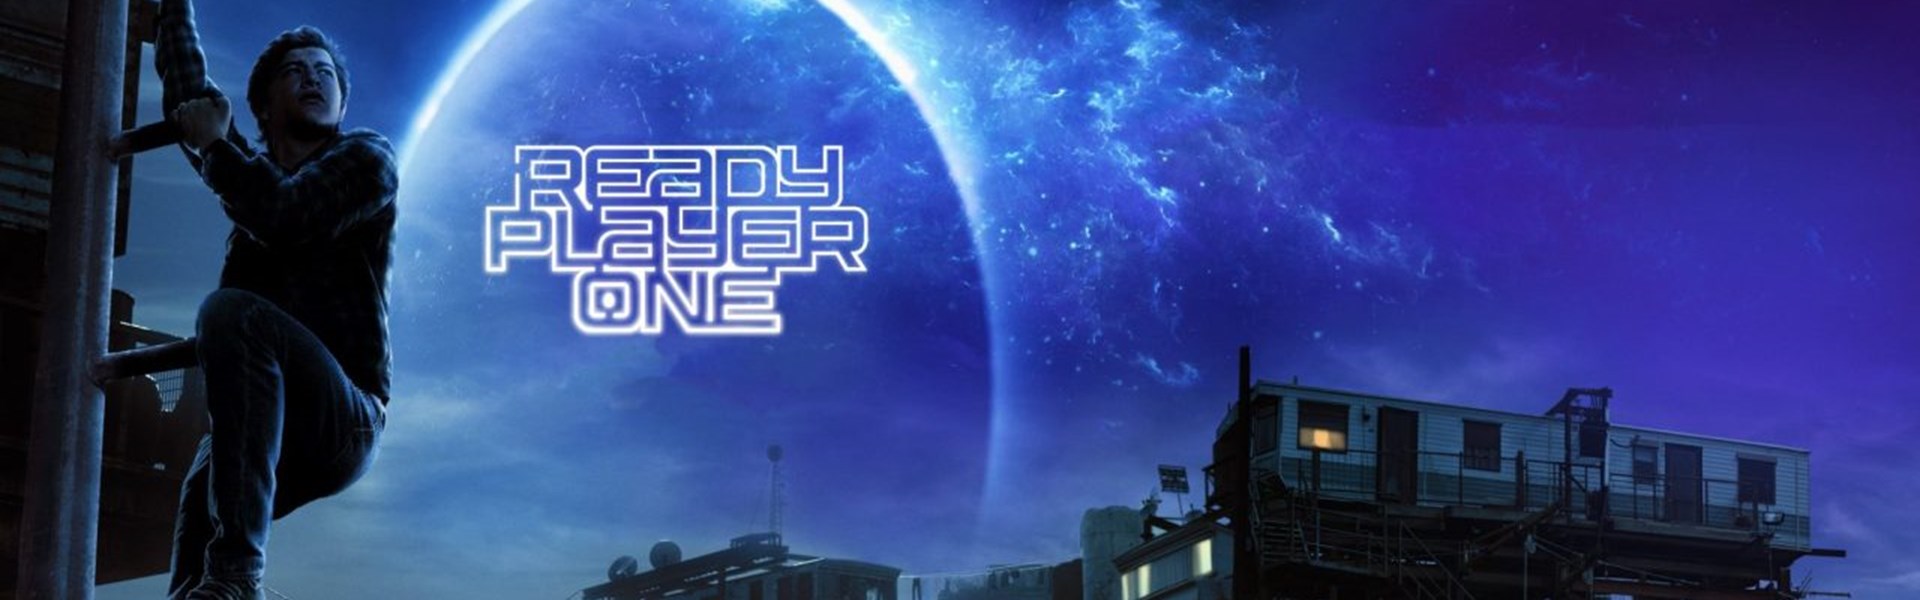 FILM: Ready Player One